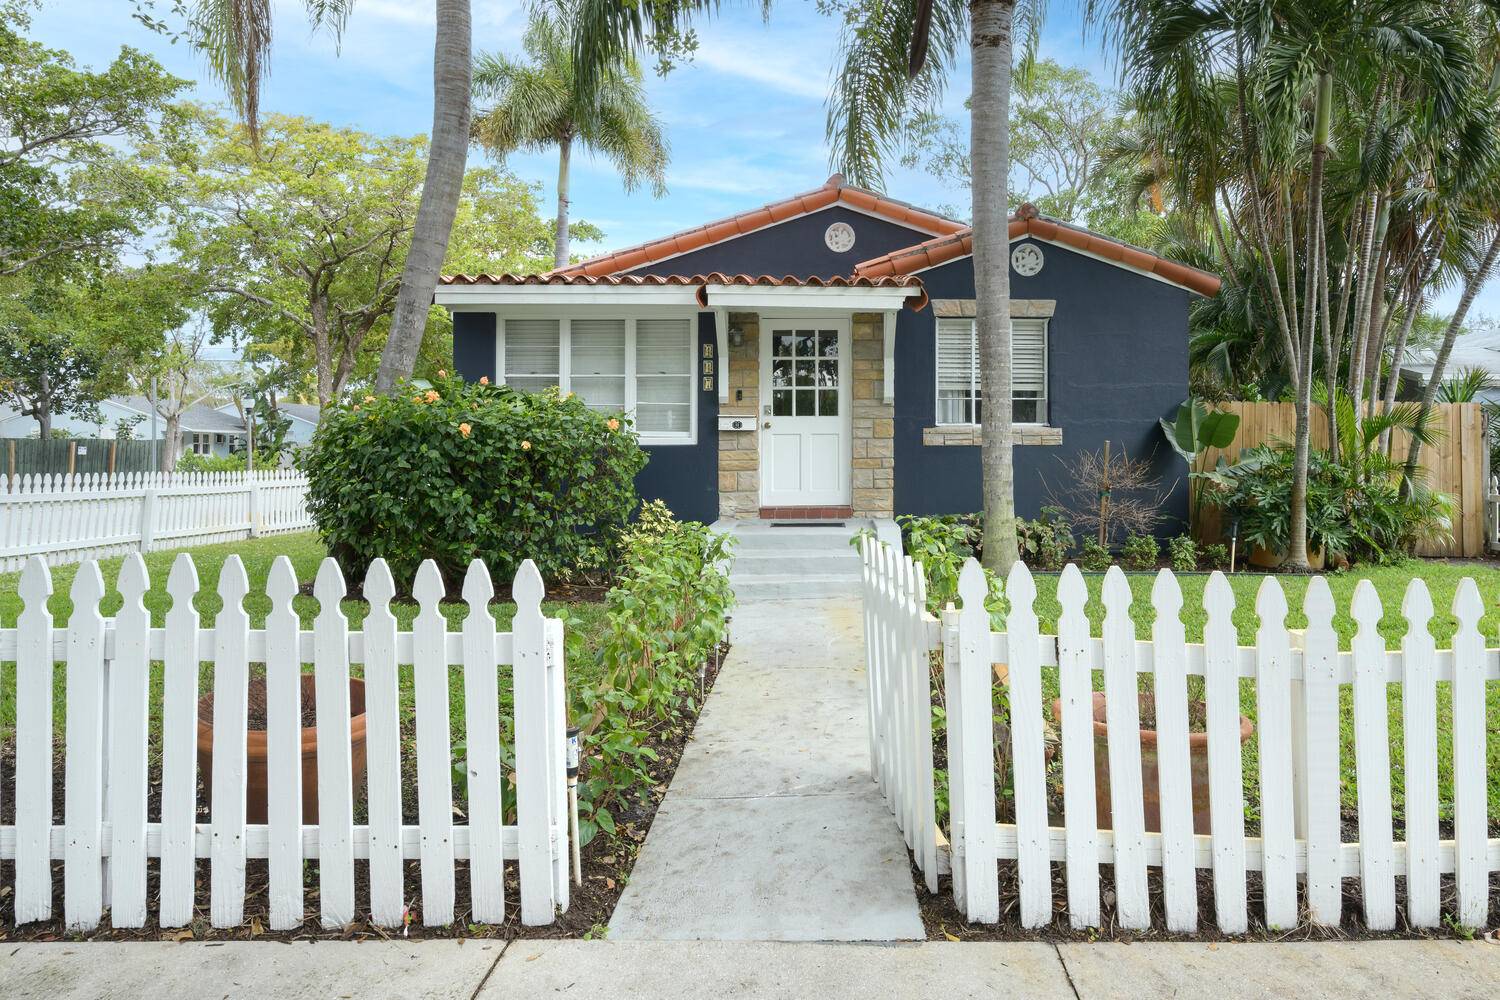 Built in 1949 in Historic Old Northwood in West Palm Beach, this 3 bedroom single family home is TURNKEY furnished with fenced yard featuring brand new hot tub, BBQ, outdoor ...